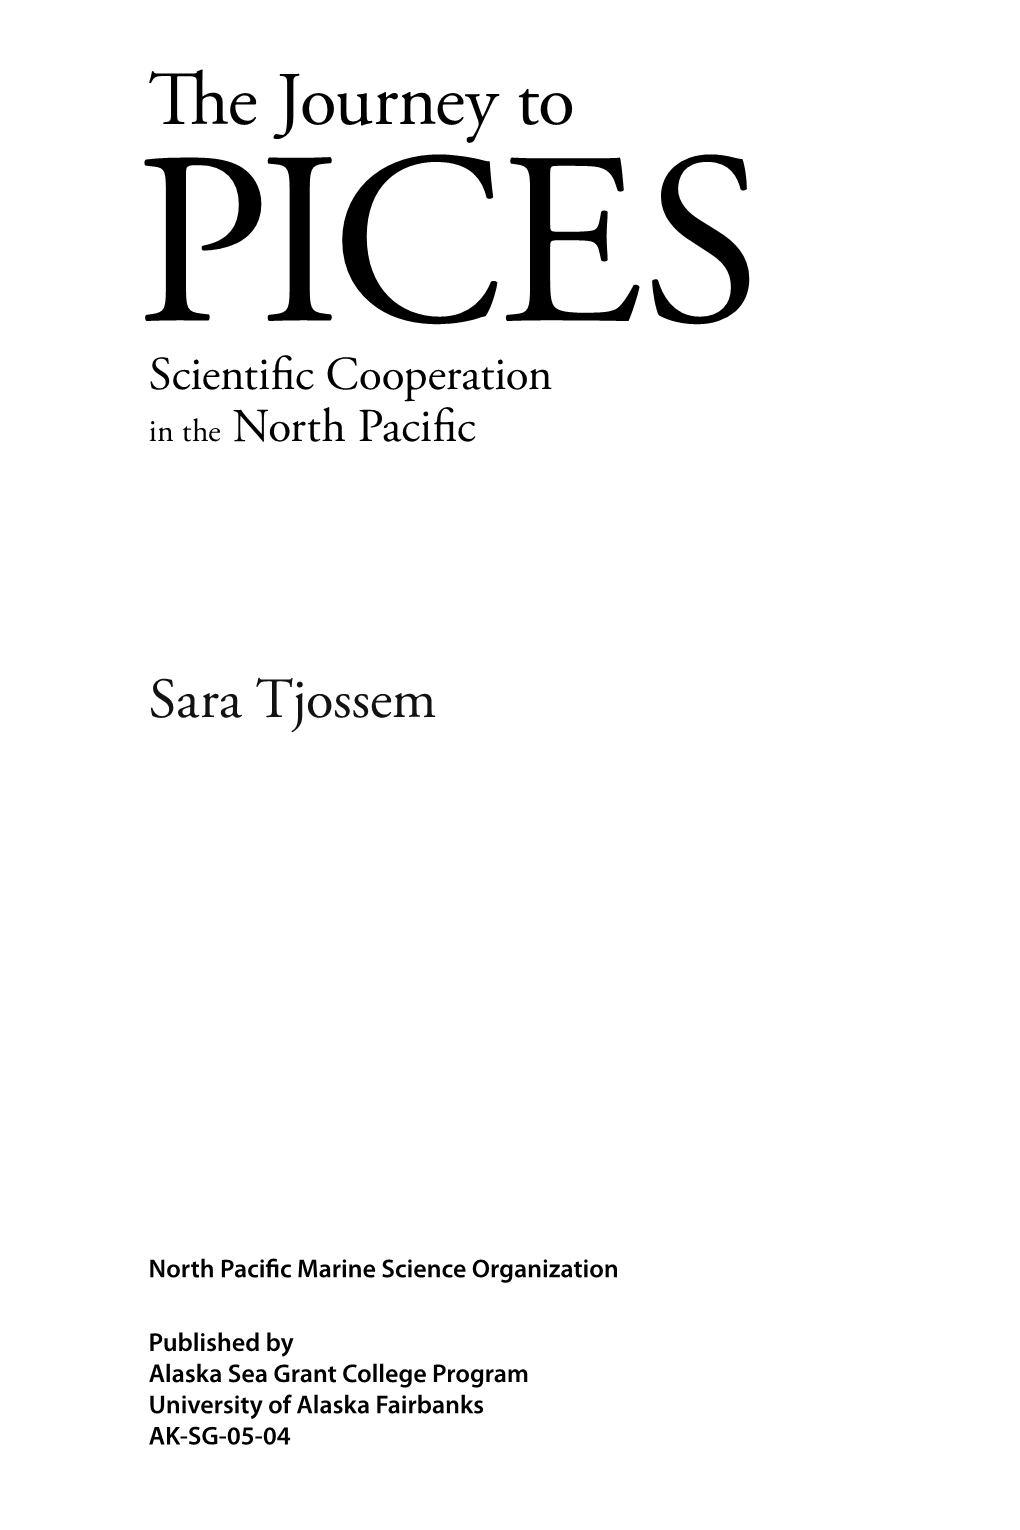 The Journey to PICES: Scientific Cooperation in the North Pacific